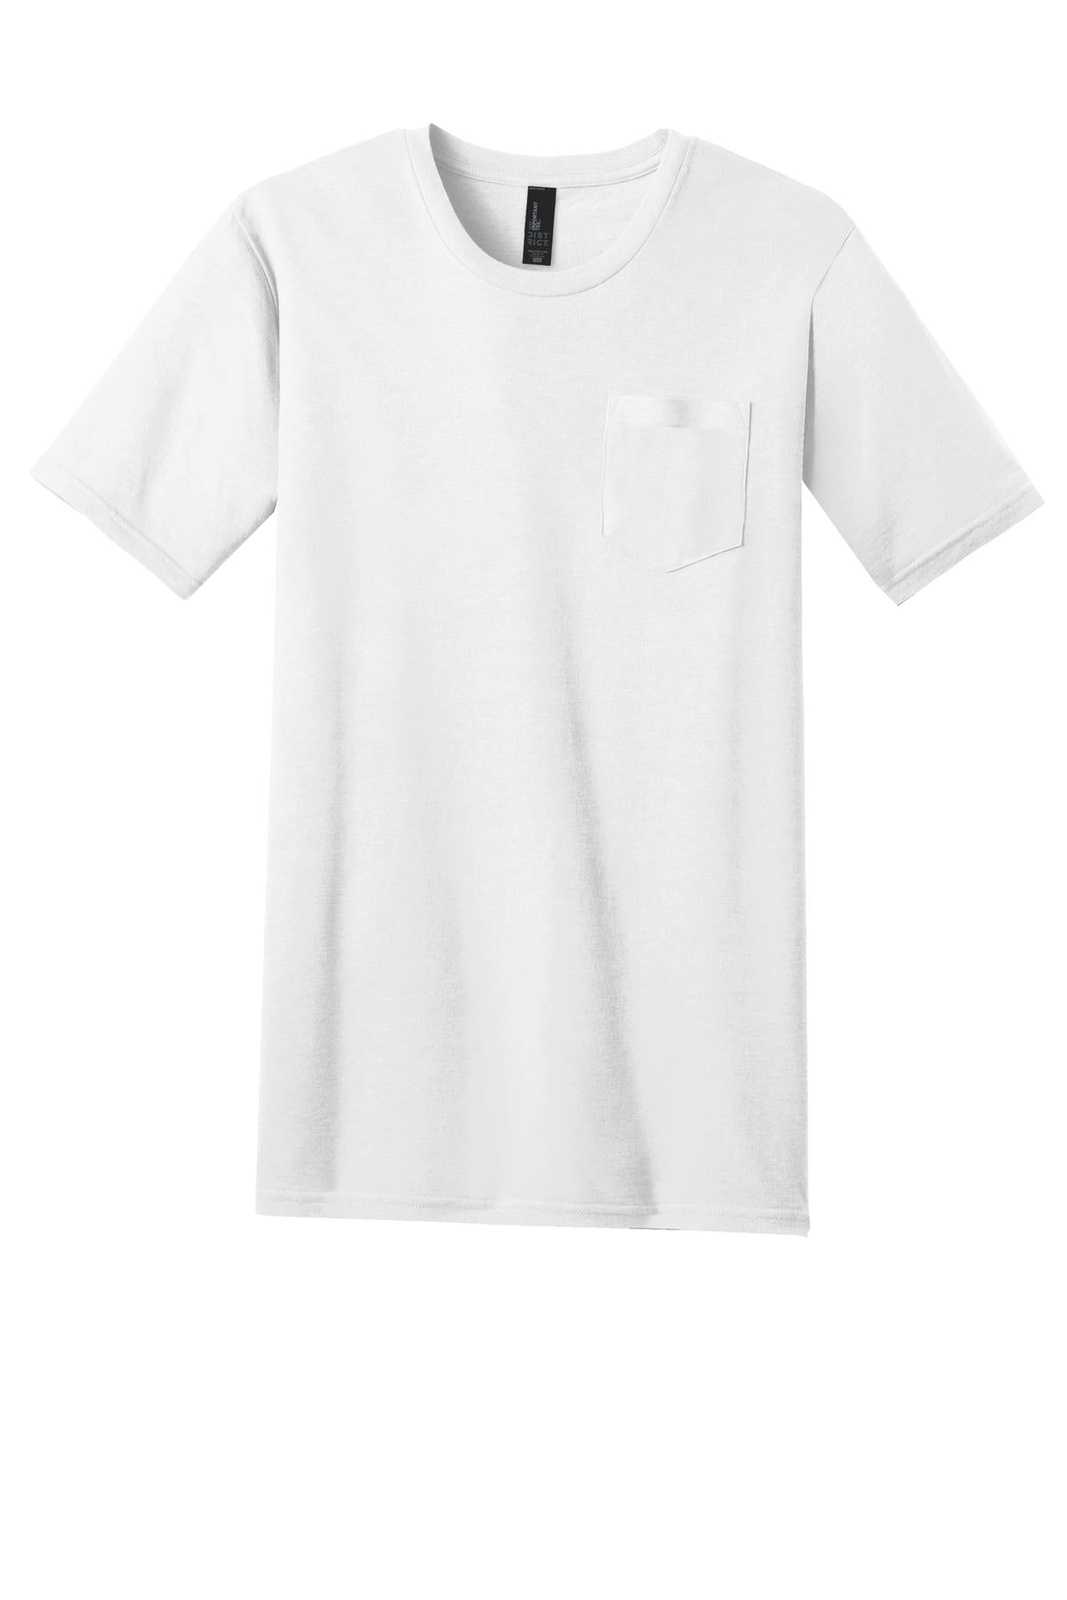 District DT6000P Very Important Tee with Pocket - White - HIT a Double - 5